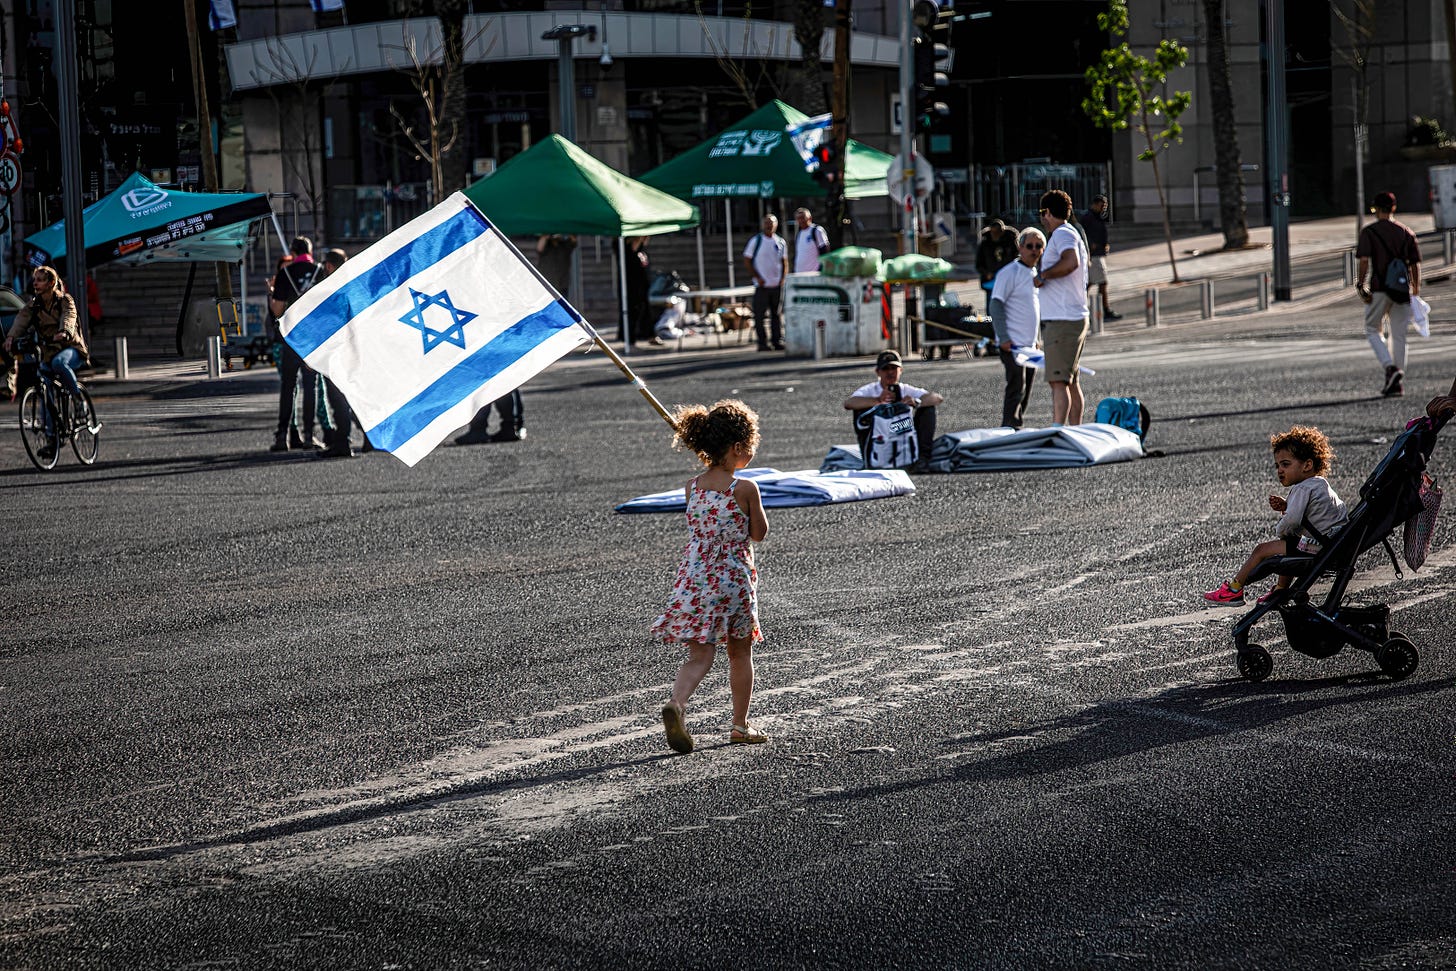  A girl walks with the Israeli flag prior to an anti-reform demonstration in Tel Aviv. (Photo by Eyal Warshavsky/SOPA Images/LightRocket via Getty Images.)